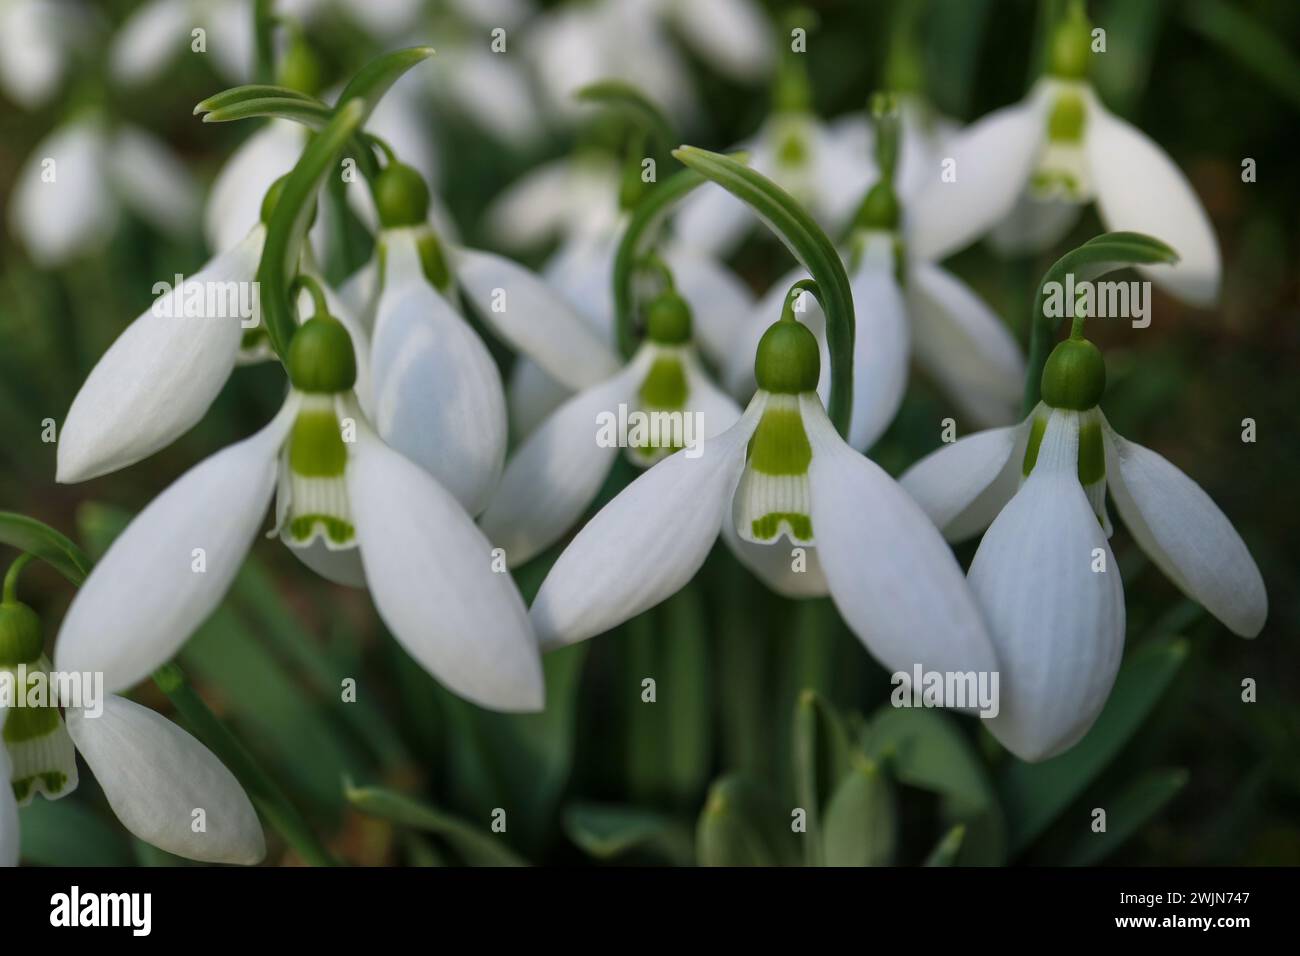 White snowdrops with delicate petals and green leaves in the garden, first snowdrops macro,  spring flowers, blossom, beauty in nature, floral photo Stock Photo